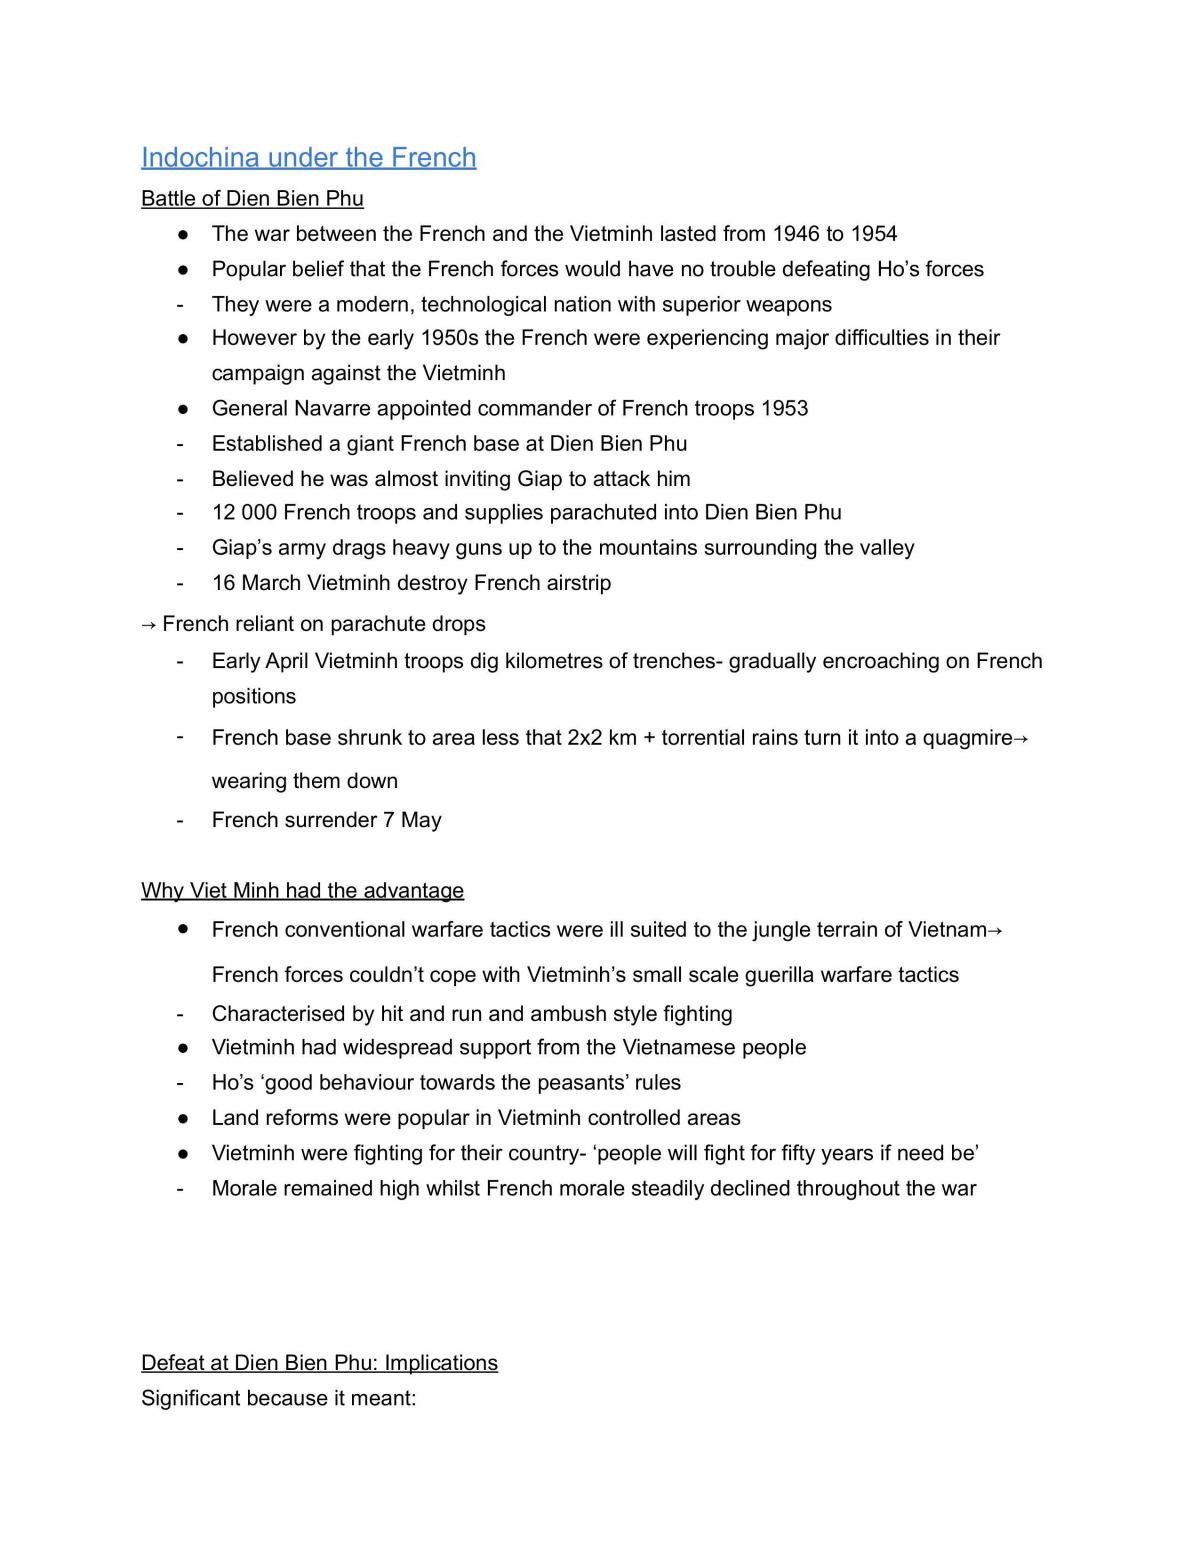 HIST253 Indochina Notes  - Page 1